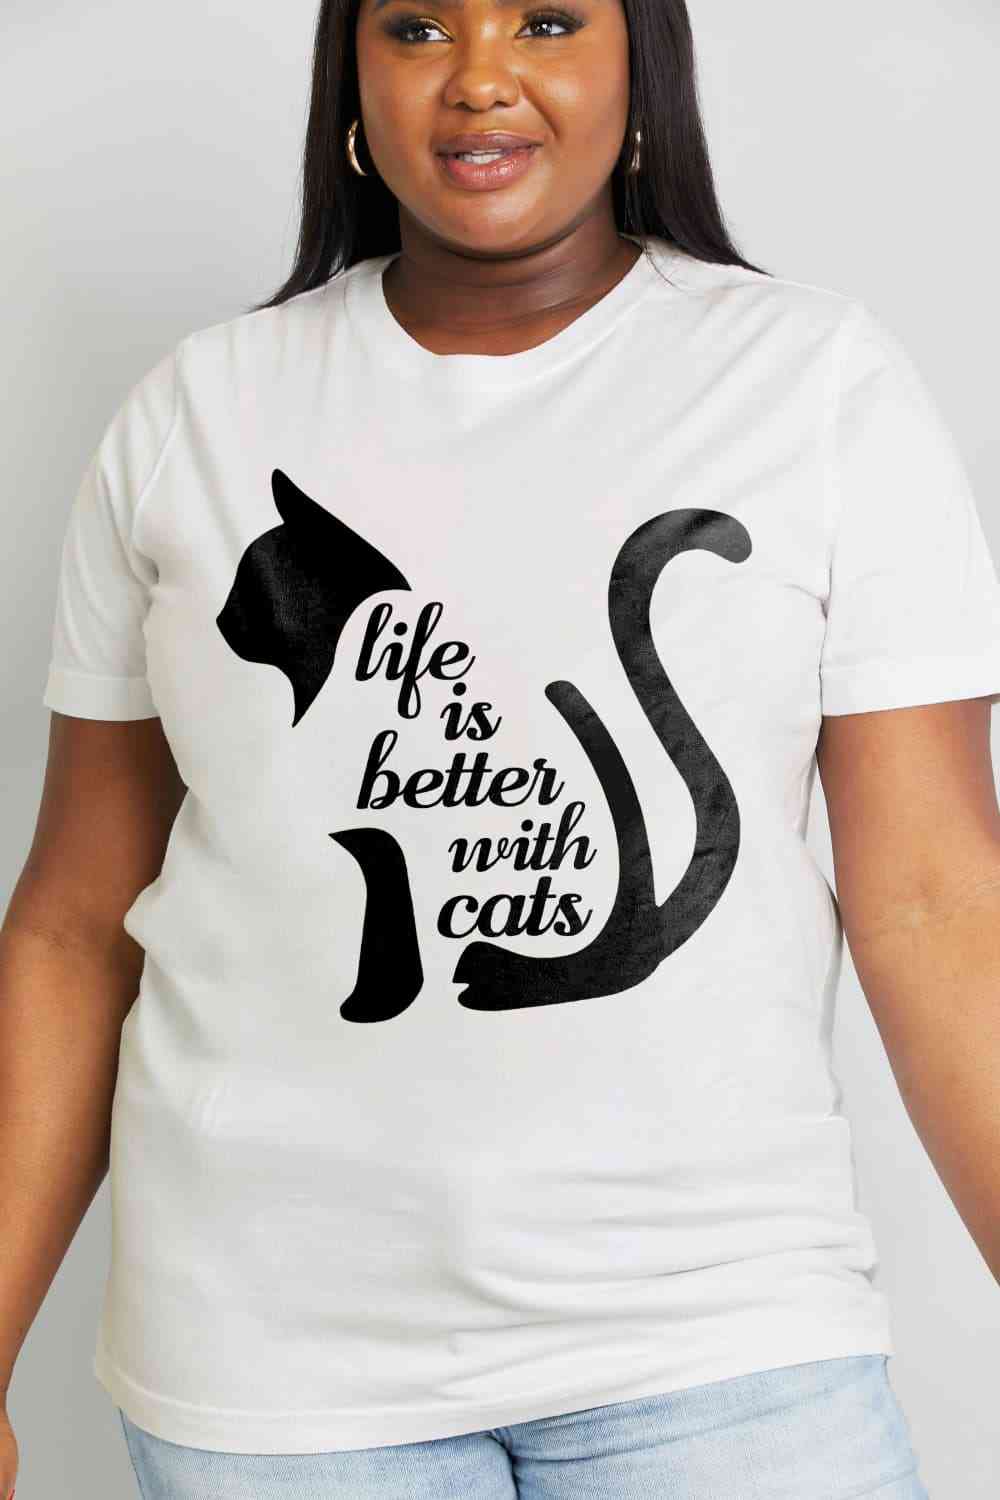 LIFE IS BETTER WITH CATS Graphic Cotton Tee - T-Shirts - Shirts & Tops - 11 - 2024